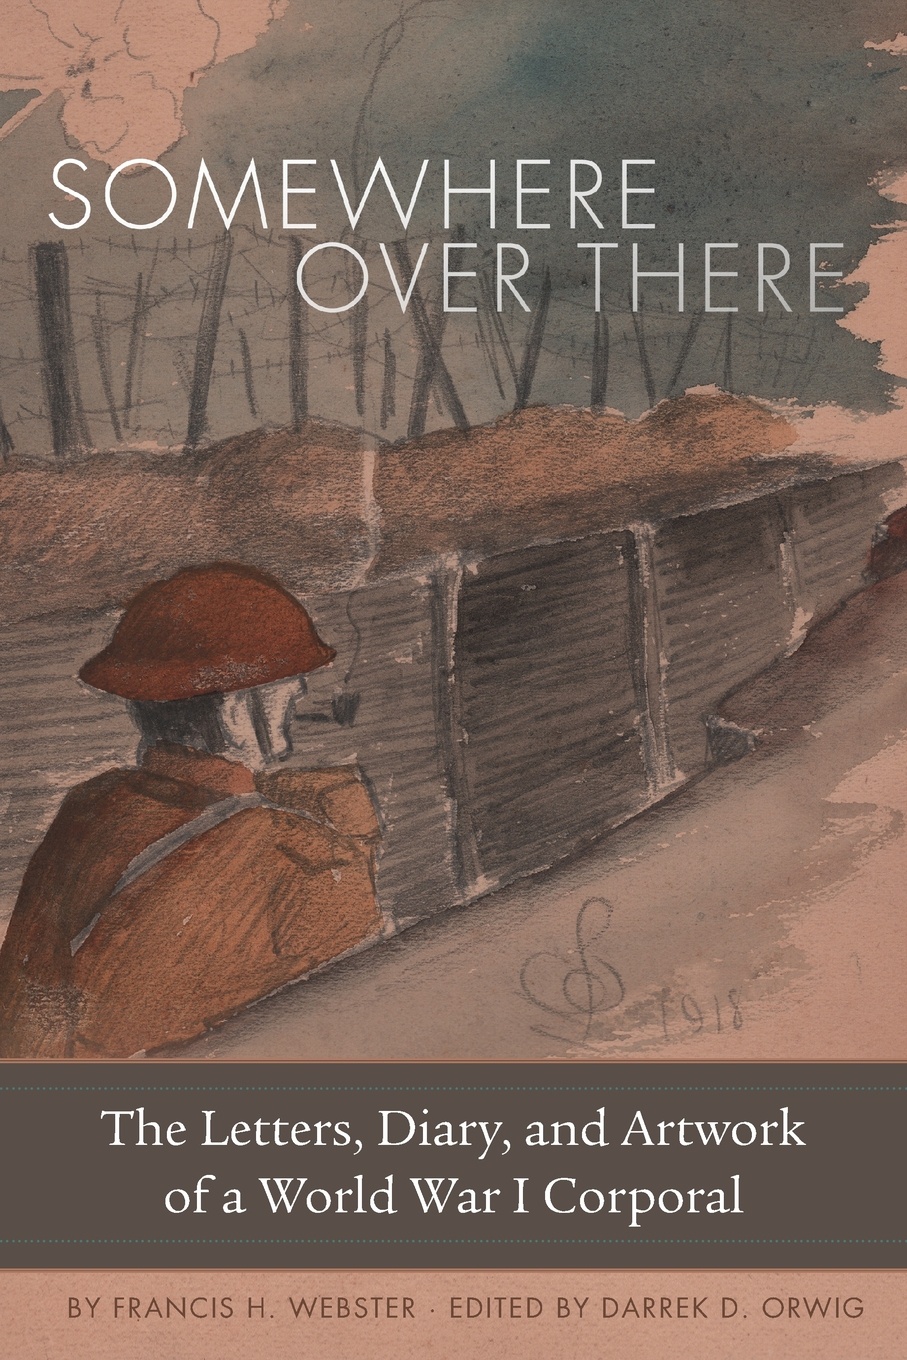 Somewhere Over There. The Letters, Diary, and Artwork of a World War I Corporal